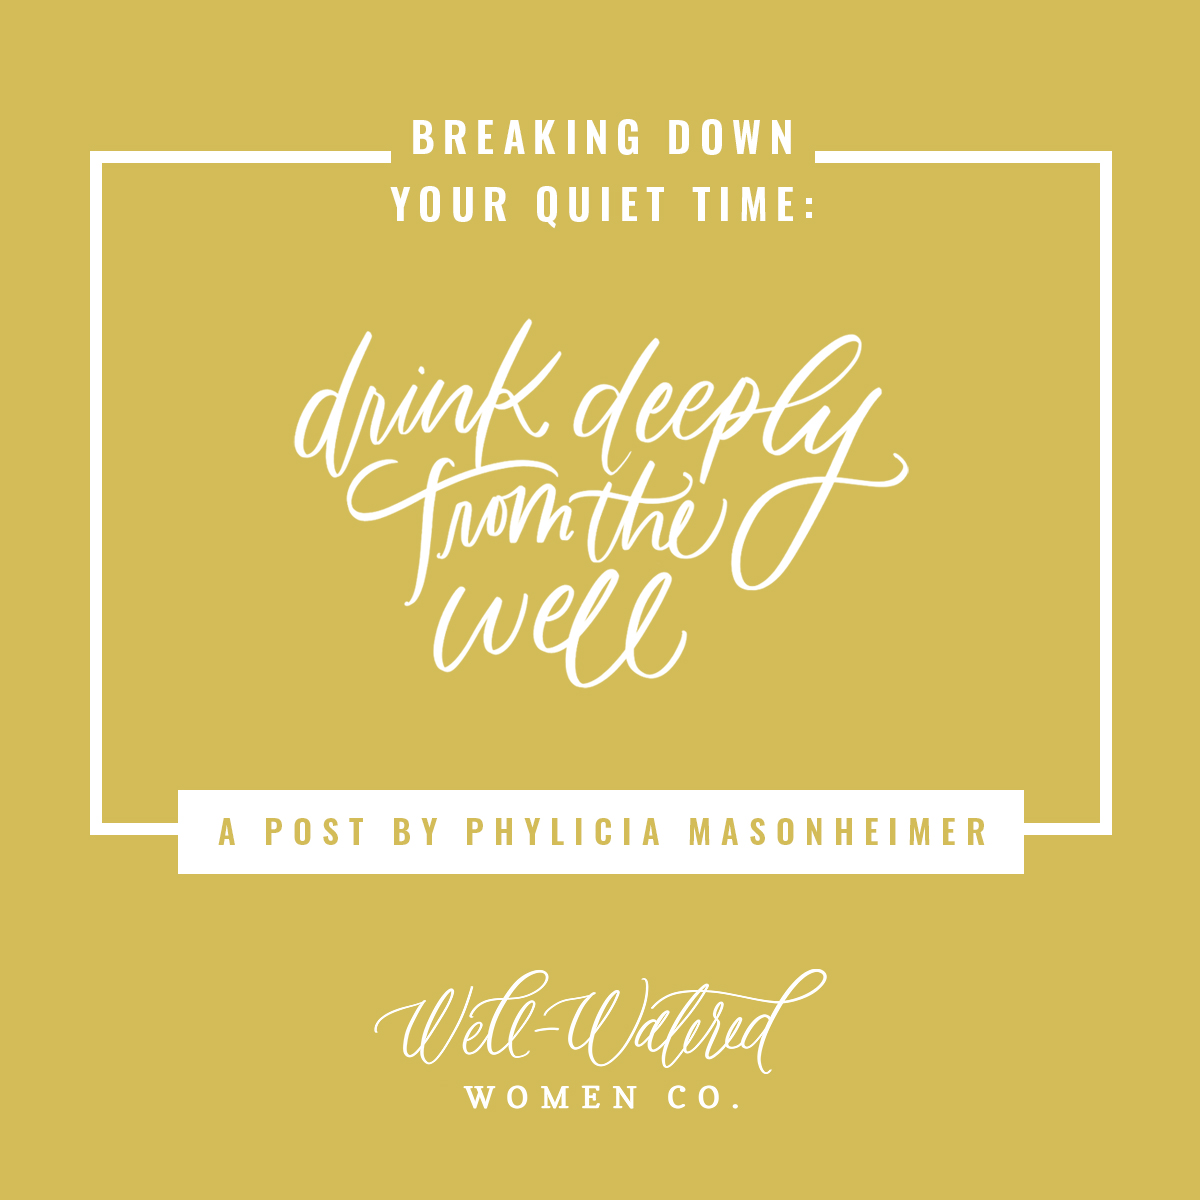 Breaking Down Your Quiet Time Blog Series: Drink Deeply from the Well